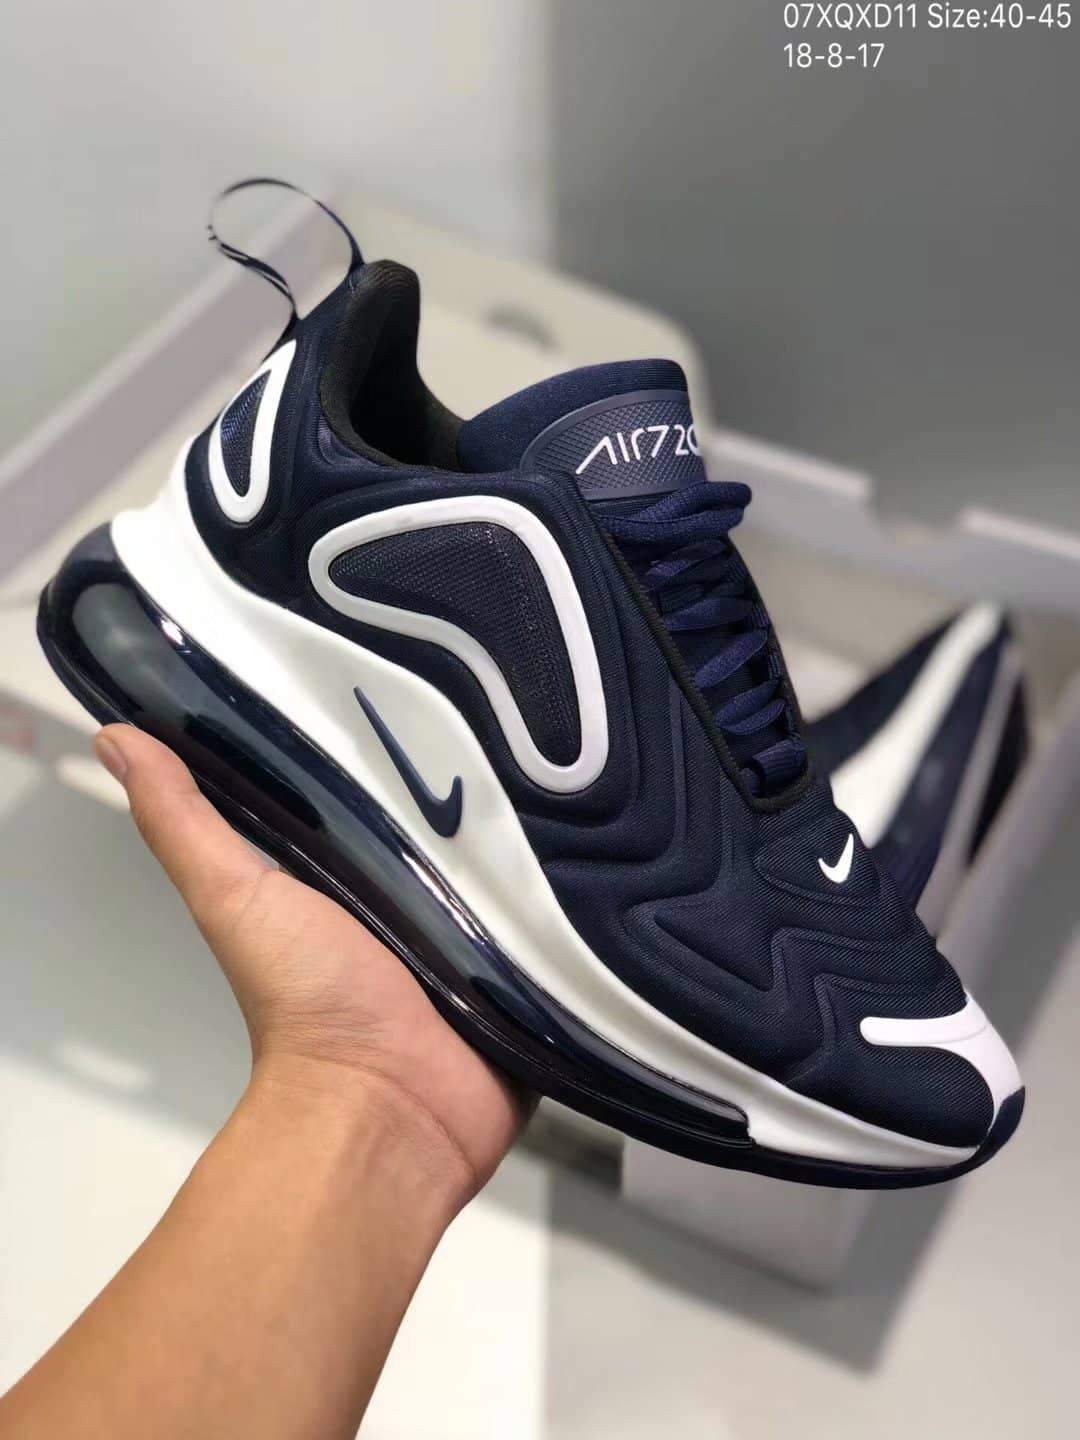 nike air max 720 deluxe